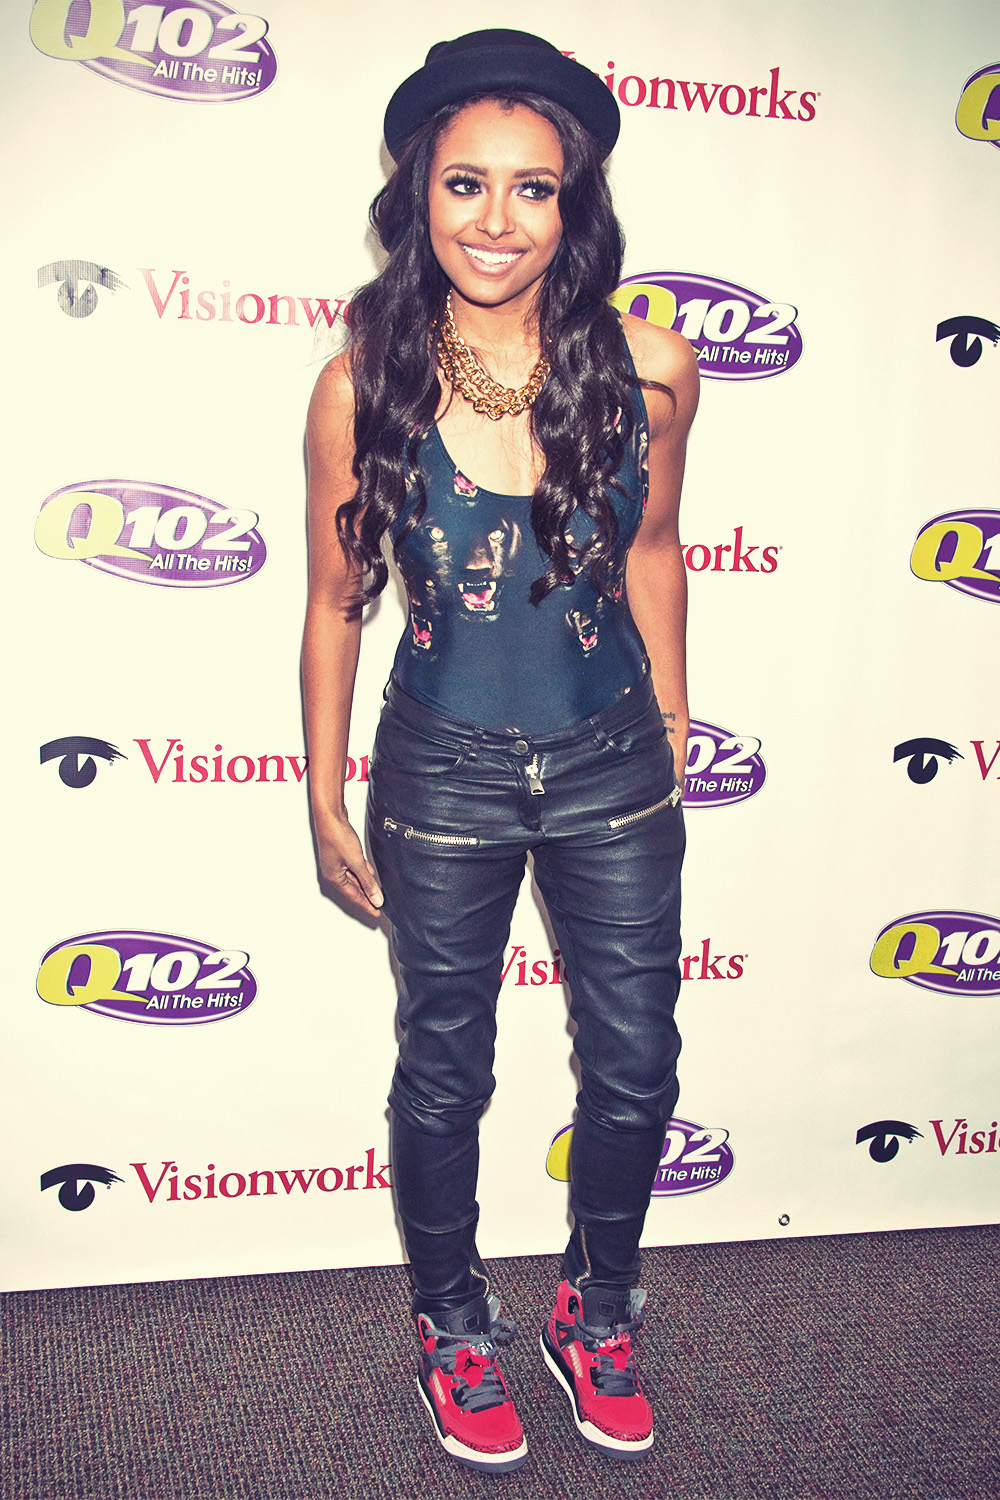 Kat Graham poses at the Q102 iHeart Performance Theater